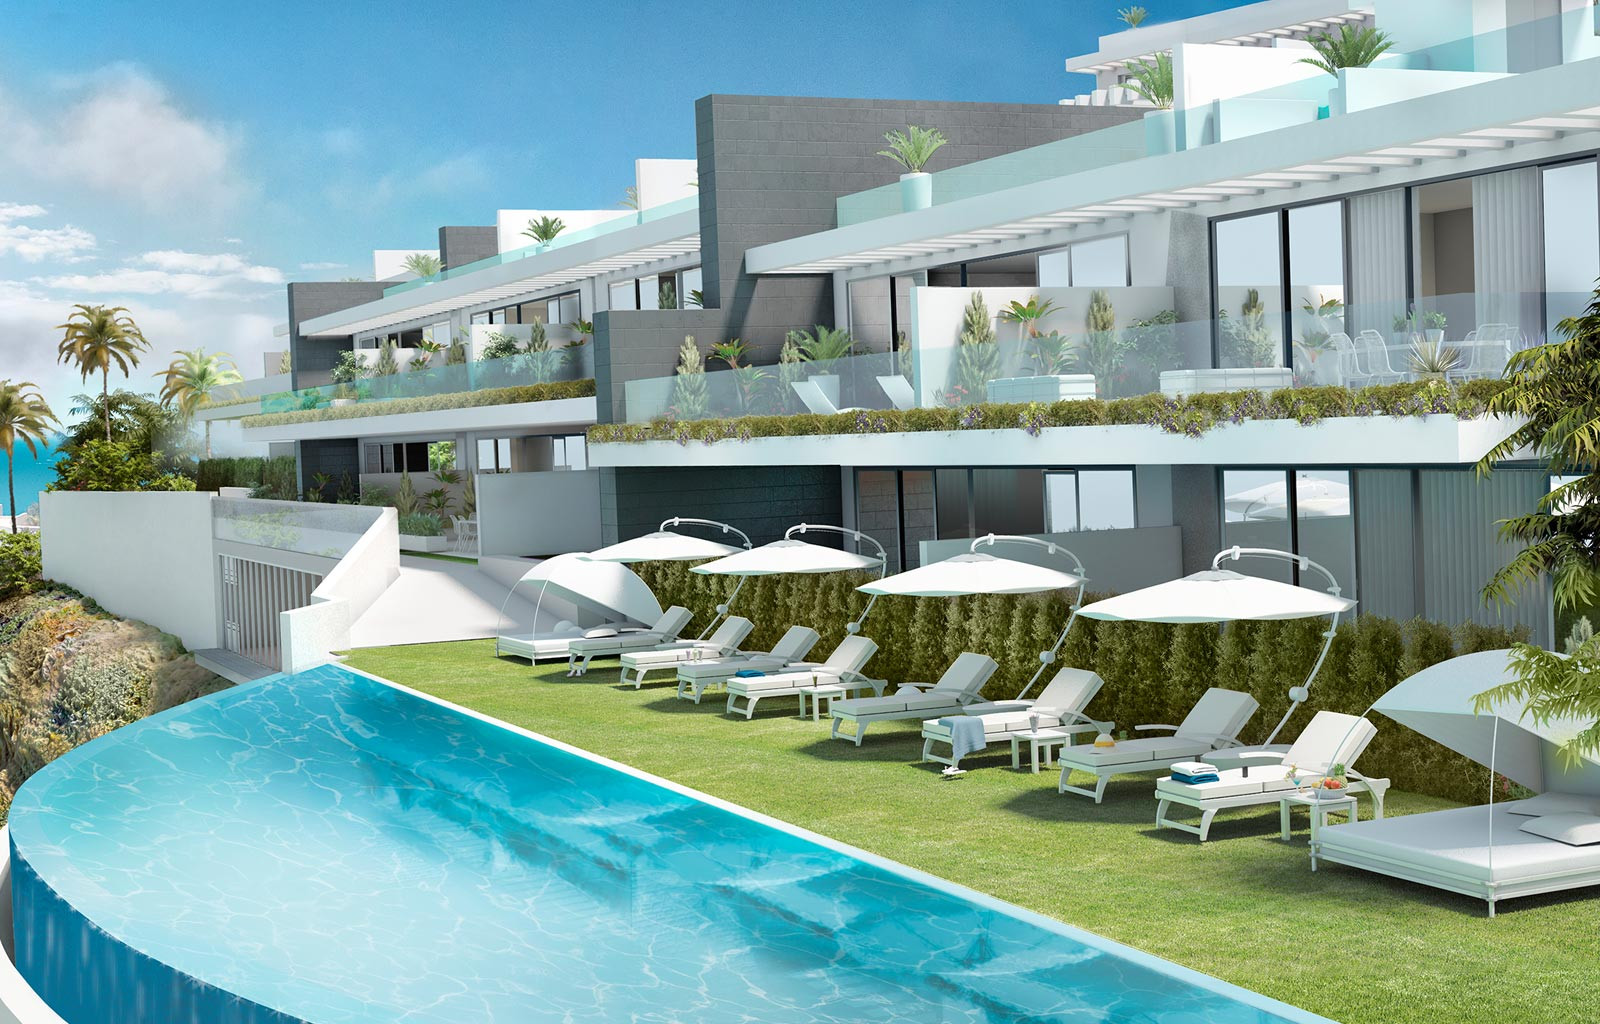 Off plan boutique complex of modern apartments and penthouses for sale in Fuengirola